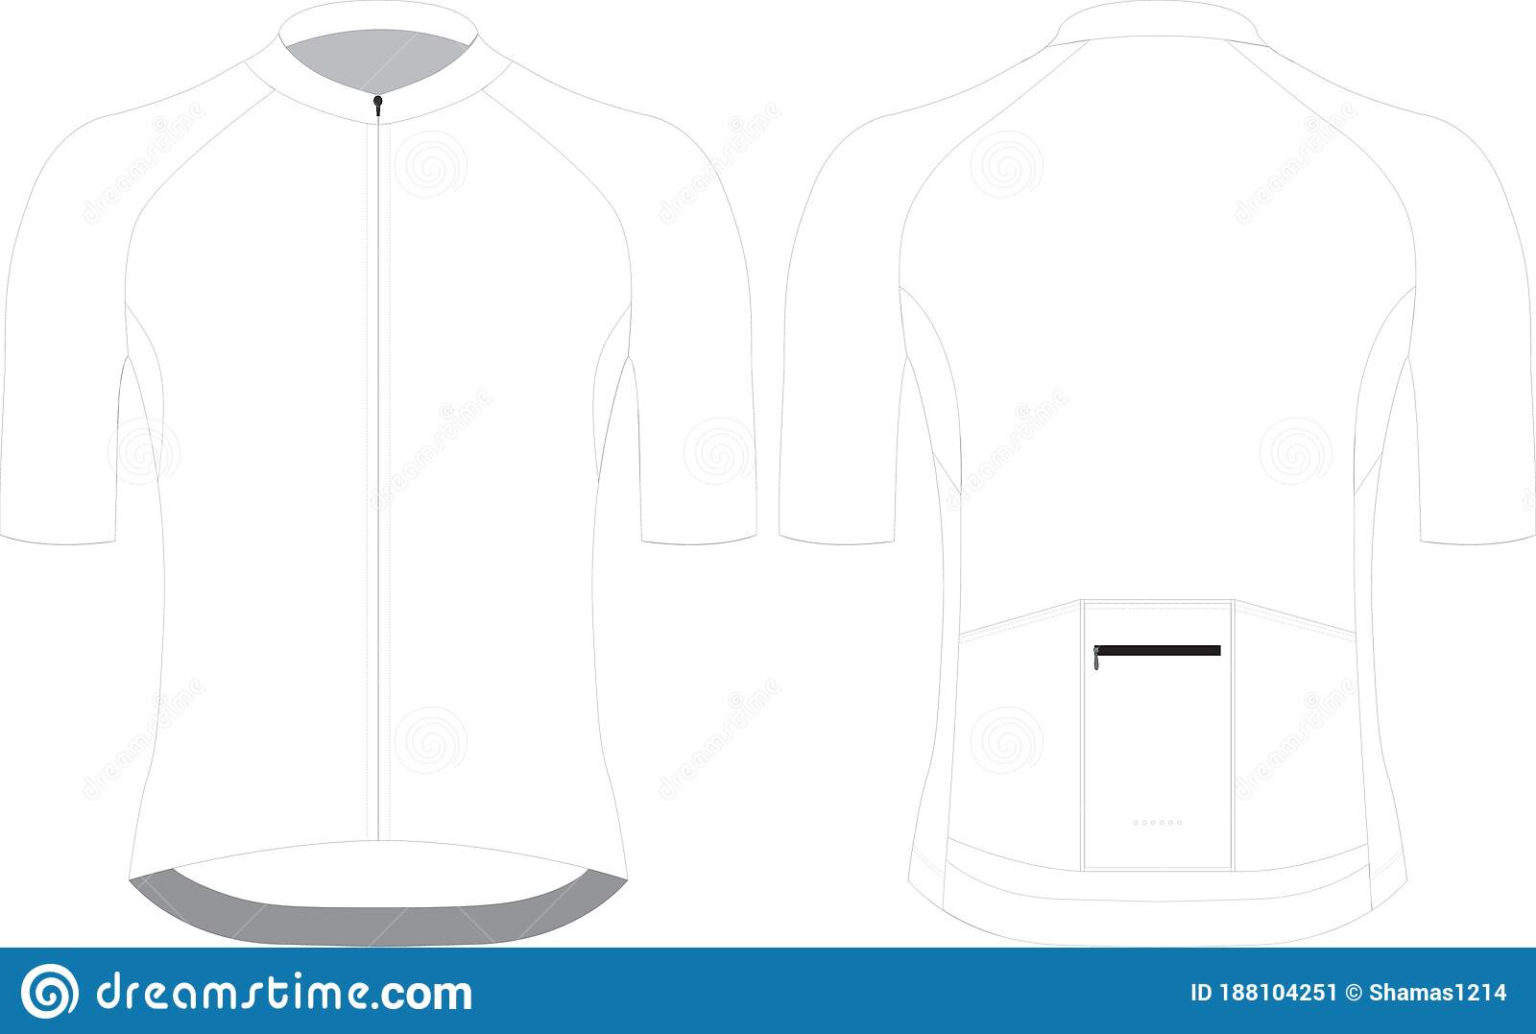 New Blank Cycling Jersey Template – Sparklingstemware